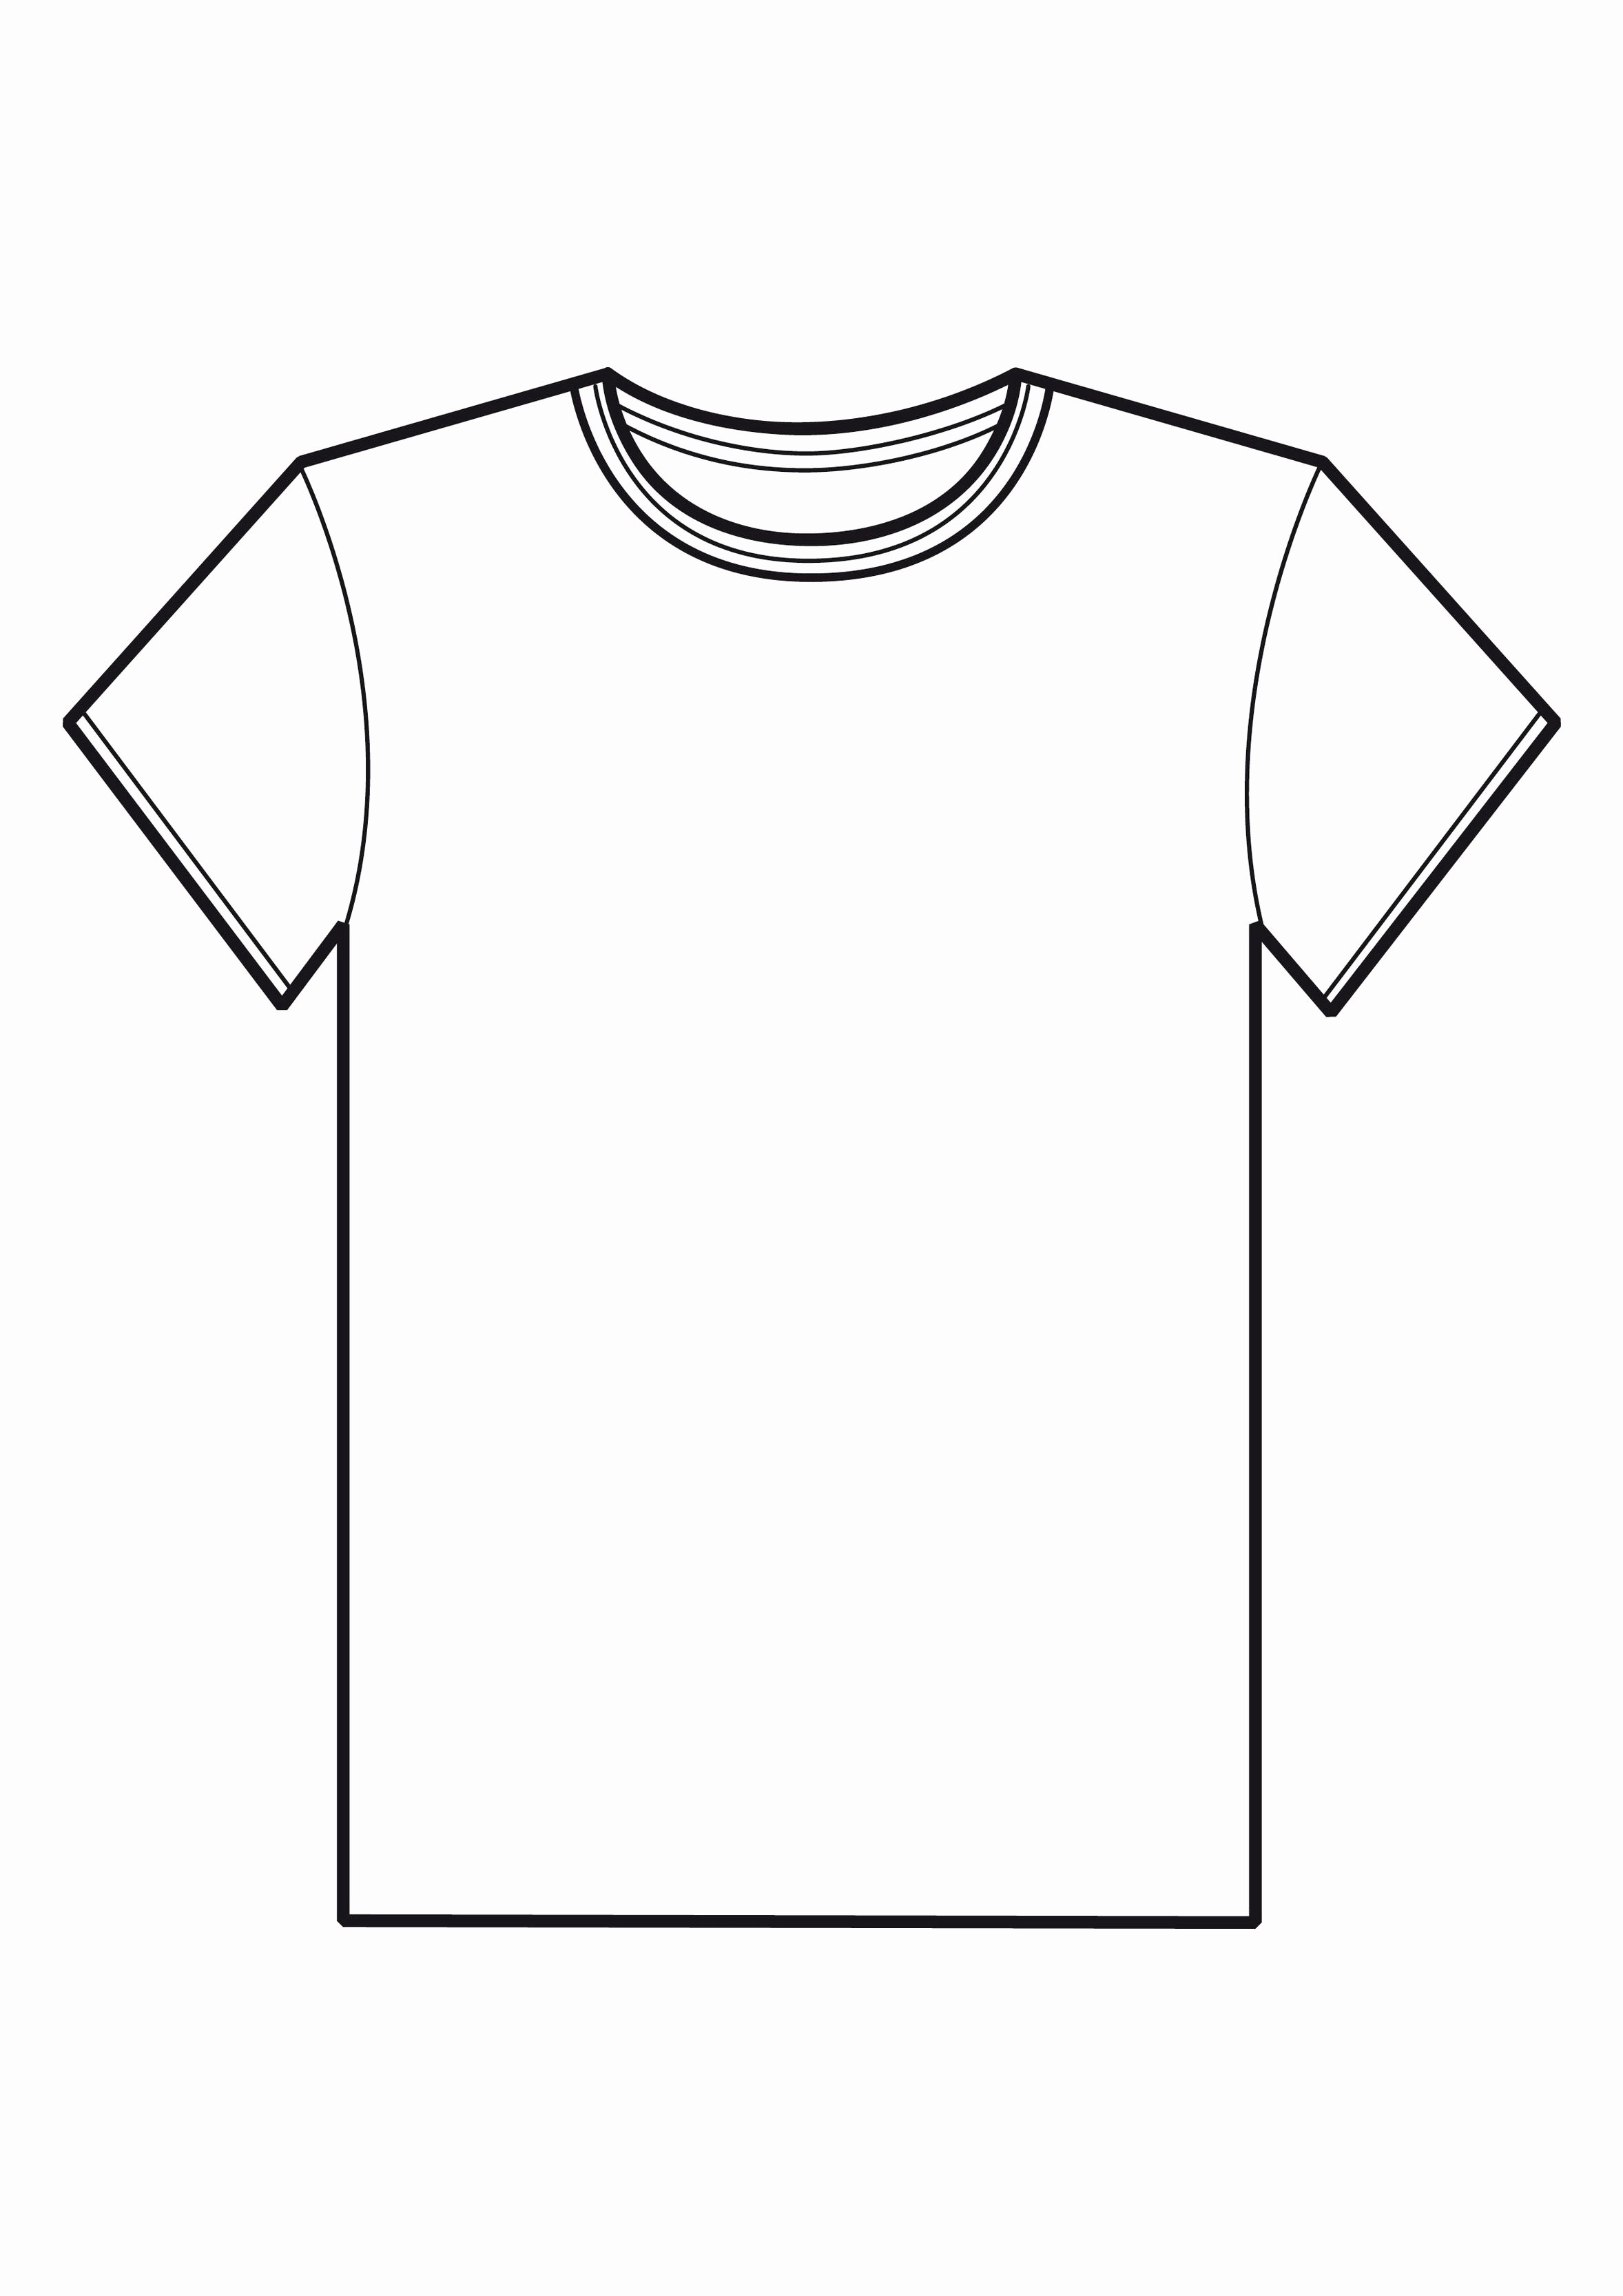 T-shirt Drawing Best Of 71 Free T Shirt Clipart Cliparting